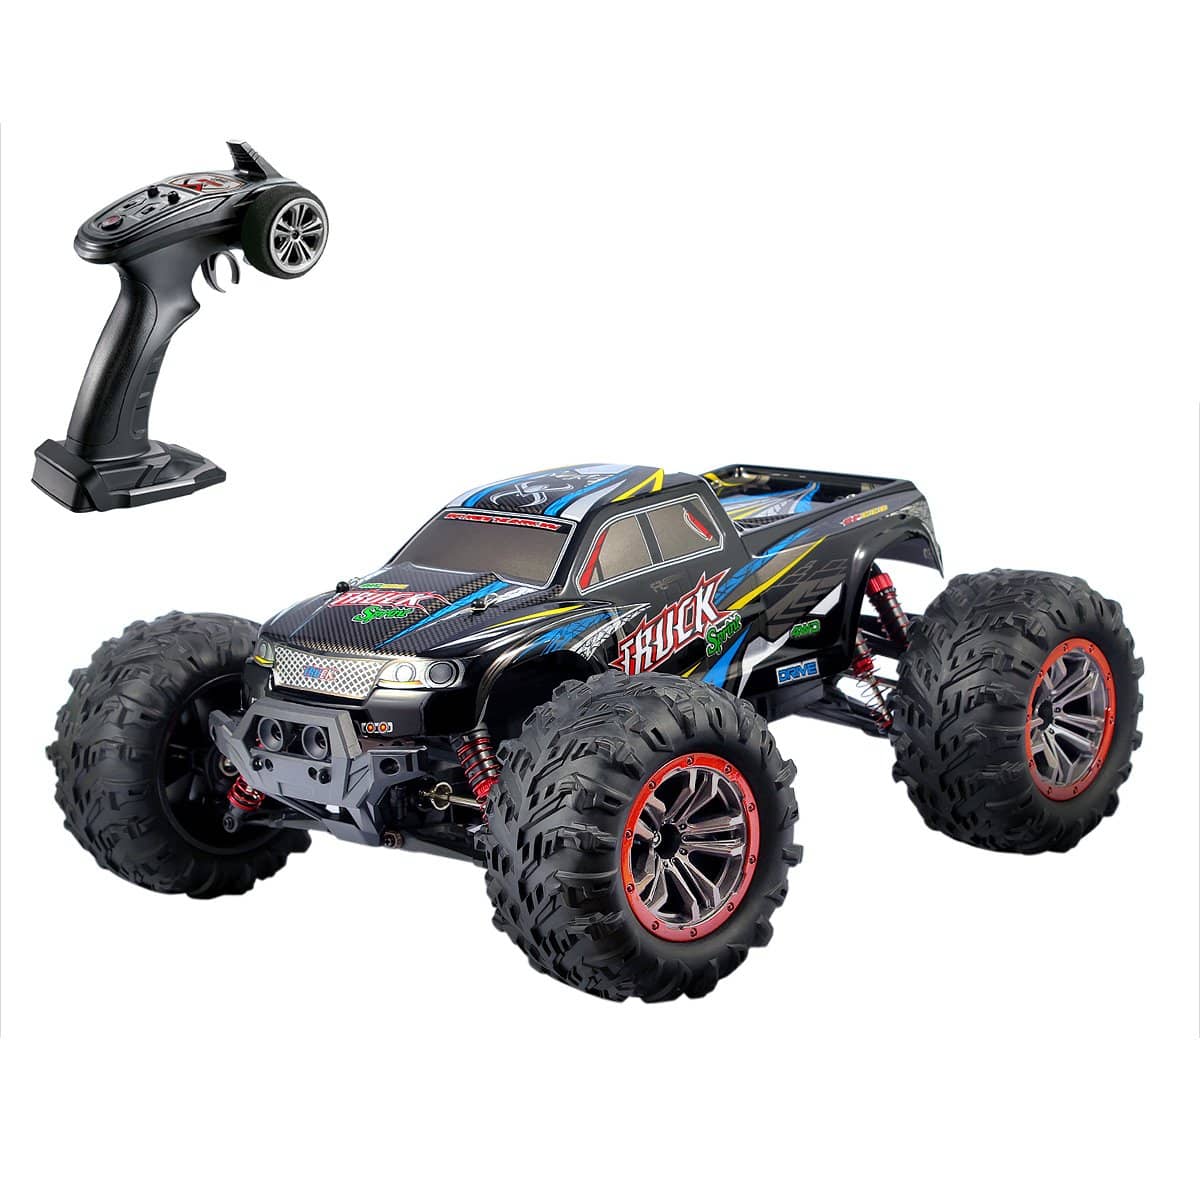 Hosim 1/10 Remote Control Car RC Car Monster Truck 9125 with 2 Batteries Blue